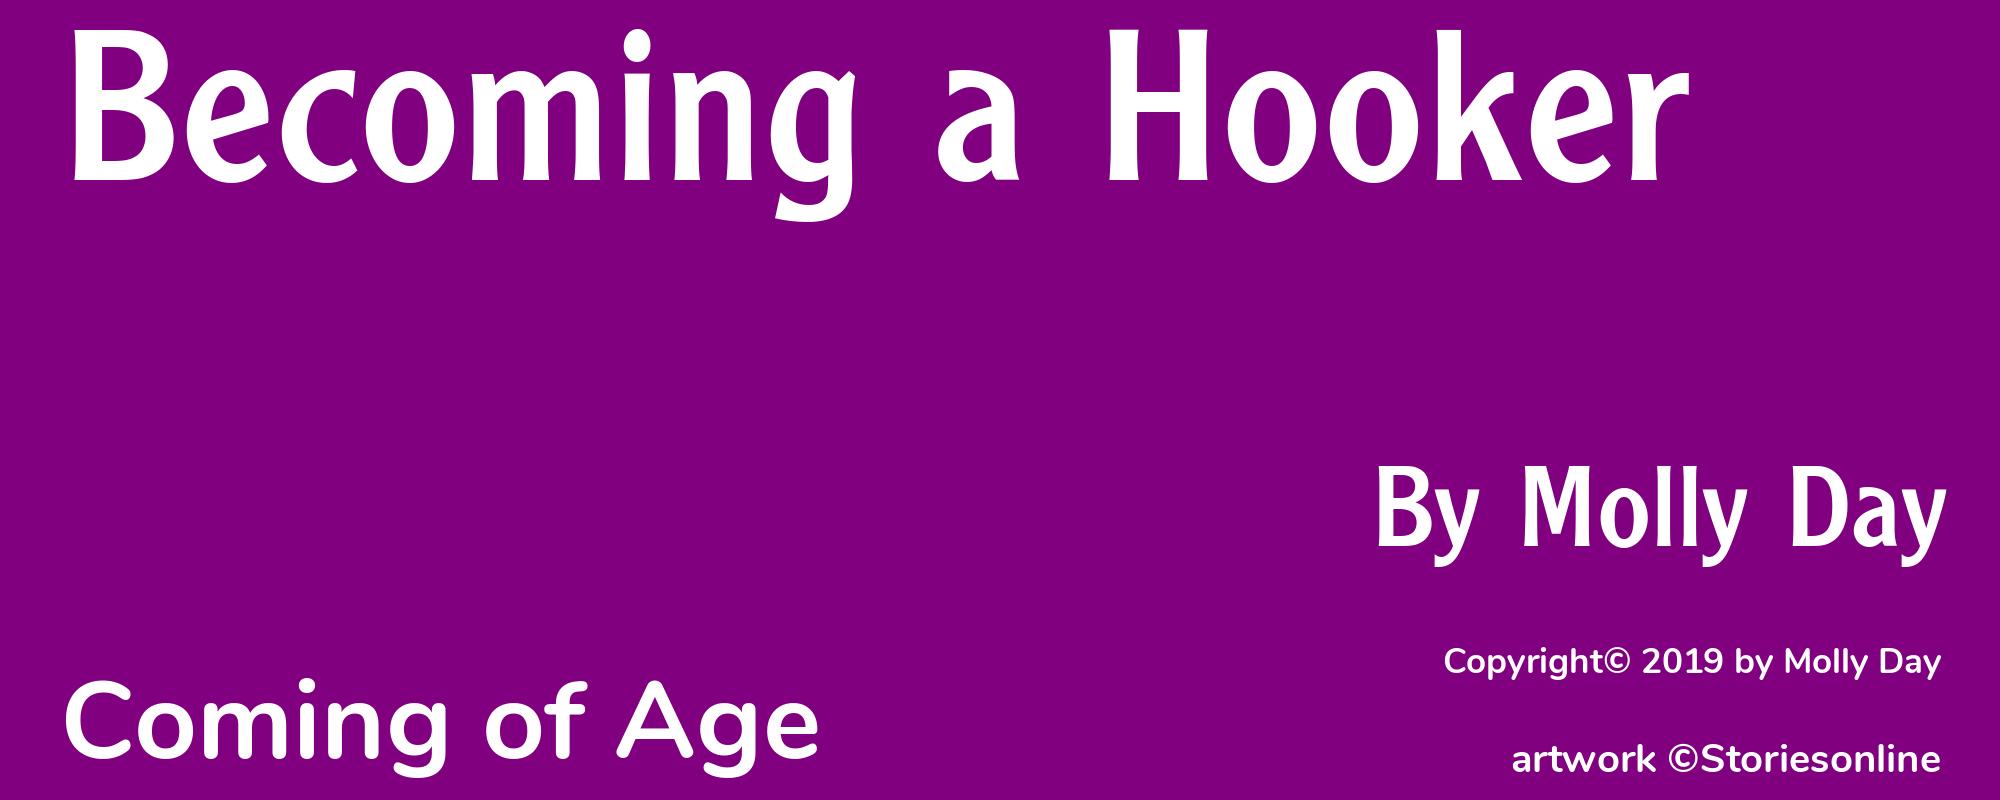 Becoming a Hooker - Cover